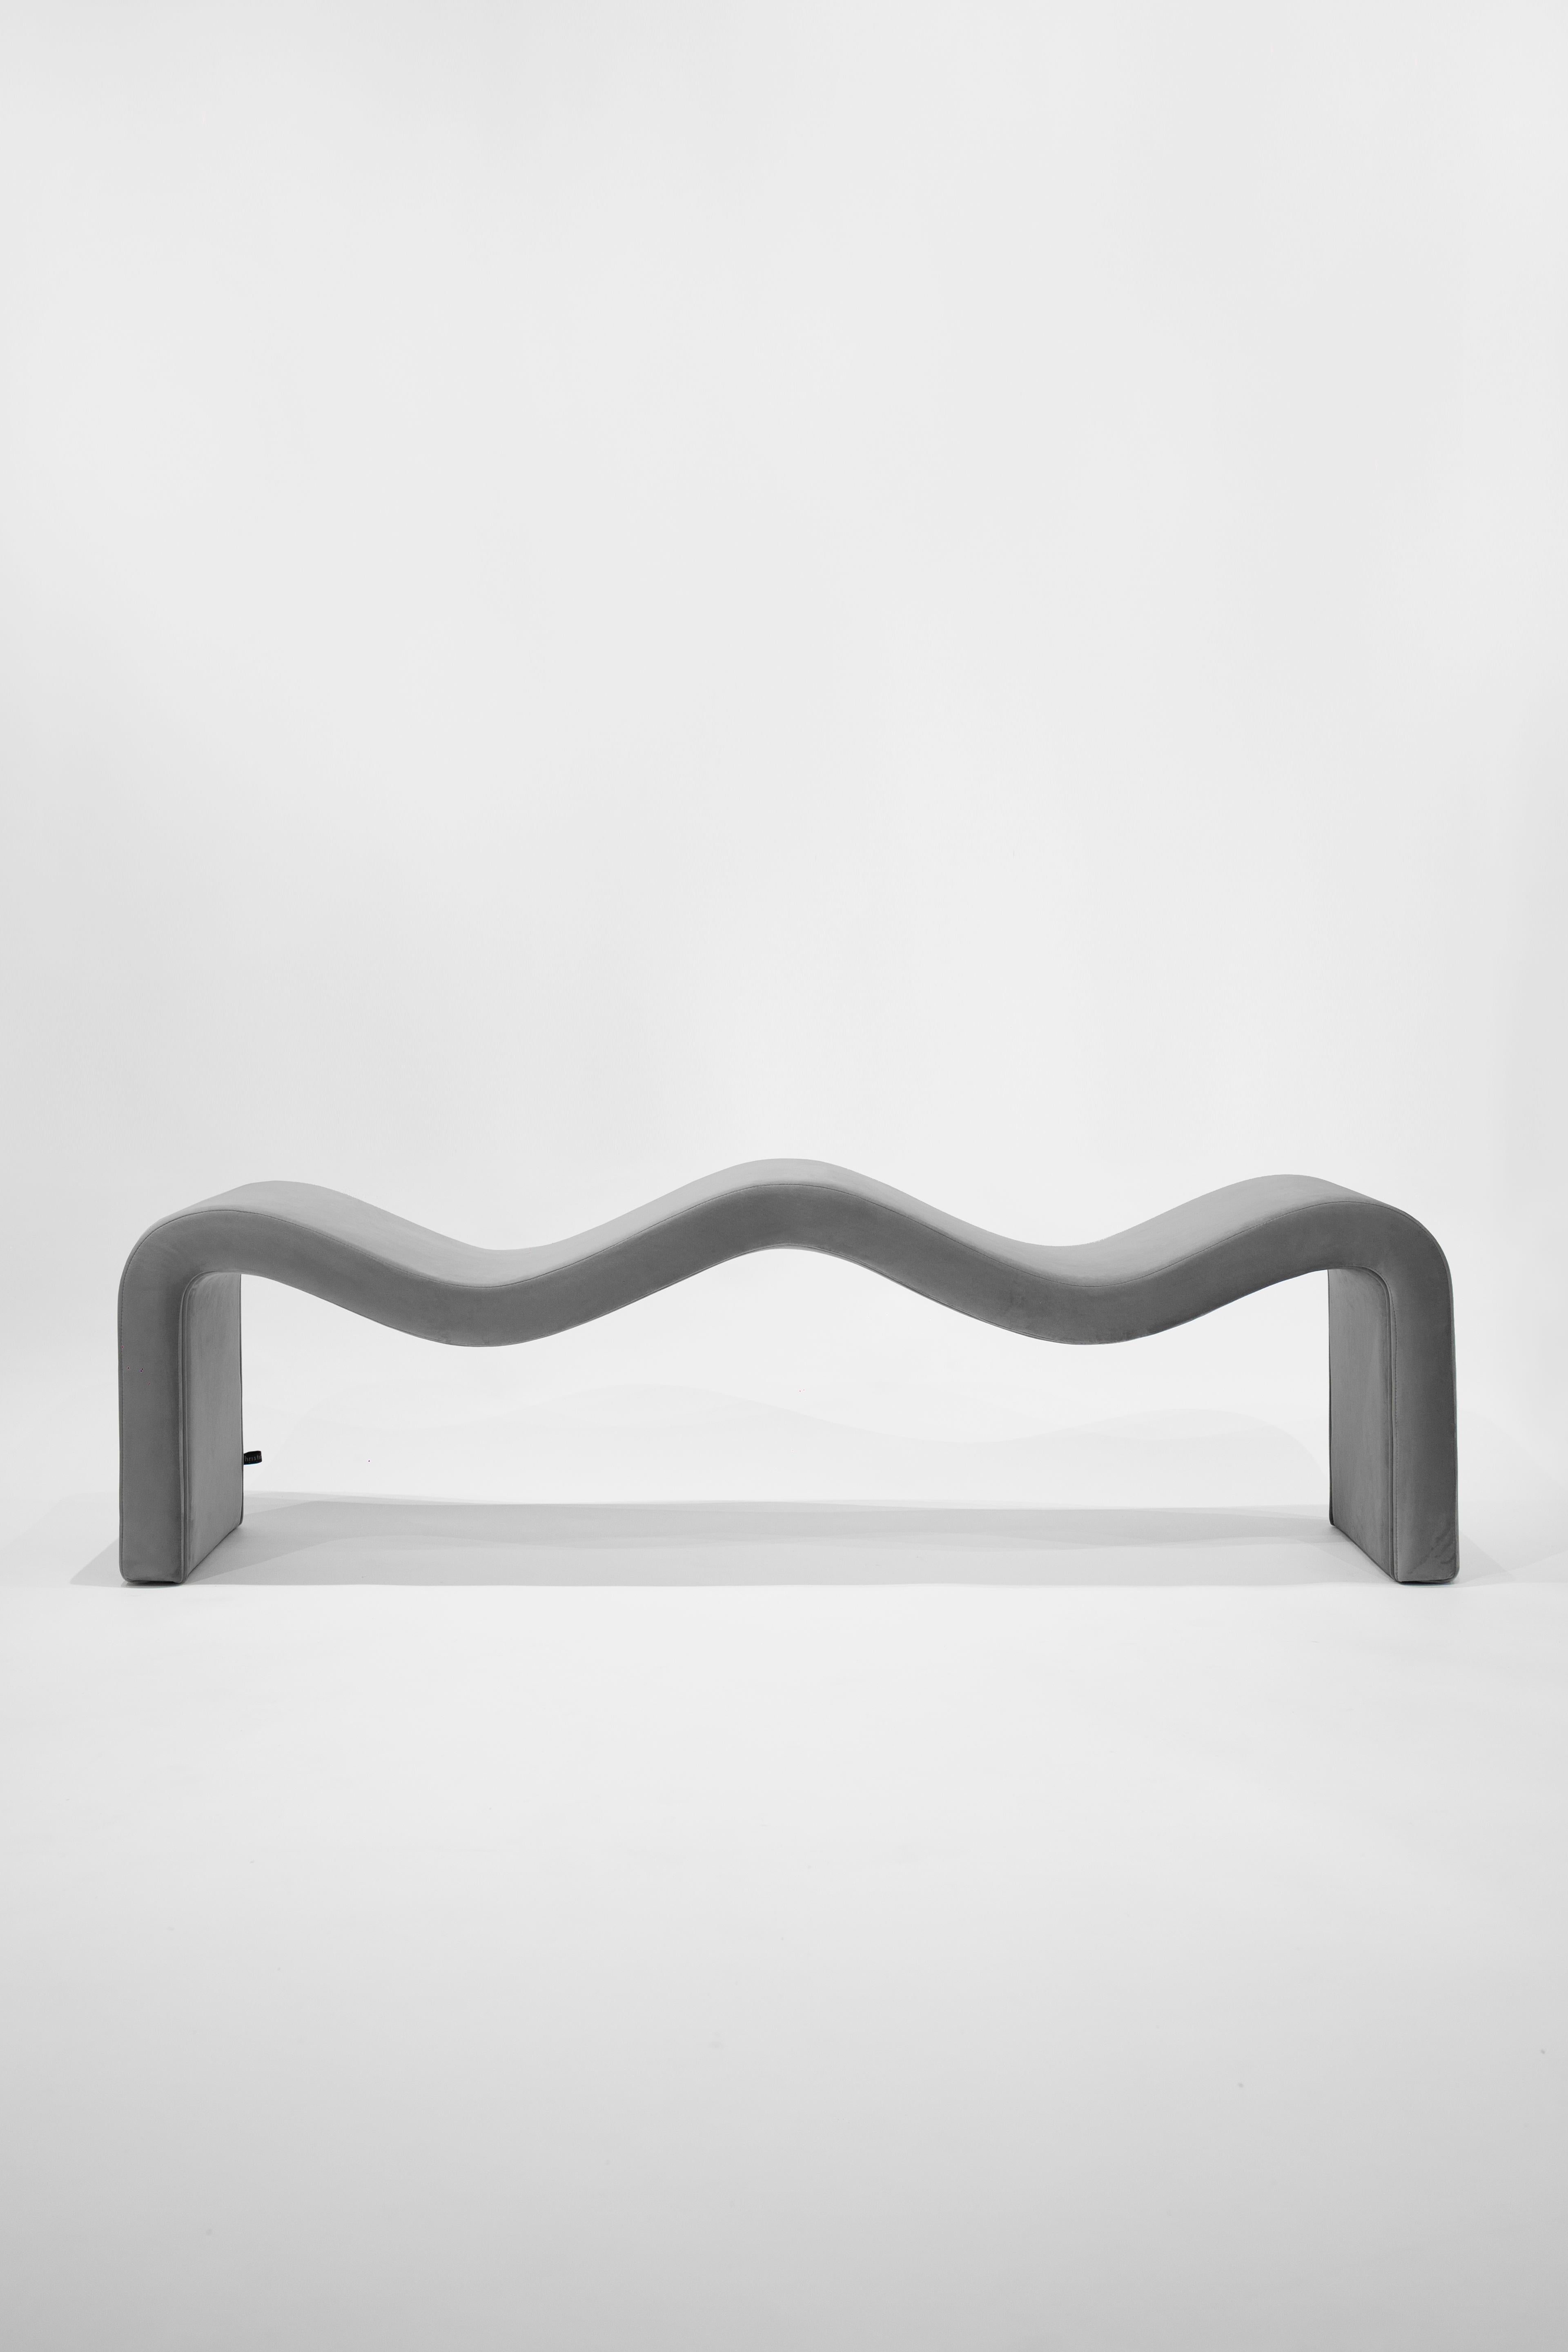 Inspired by the flow of the mediterranean streams, the design of this piece follows a double sine curve that gently forms its two-seater surface. Covered in velvet plush fabric in silver, dark gray or black, the bench gives the impression and feel